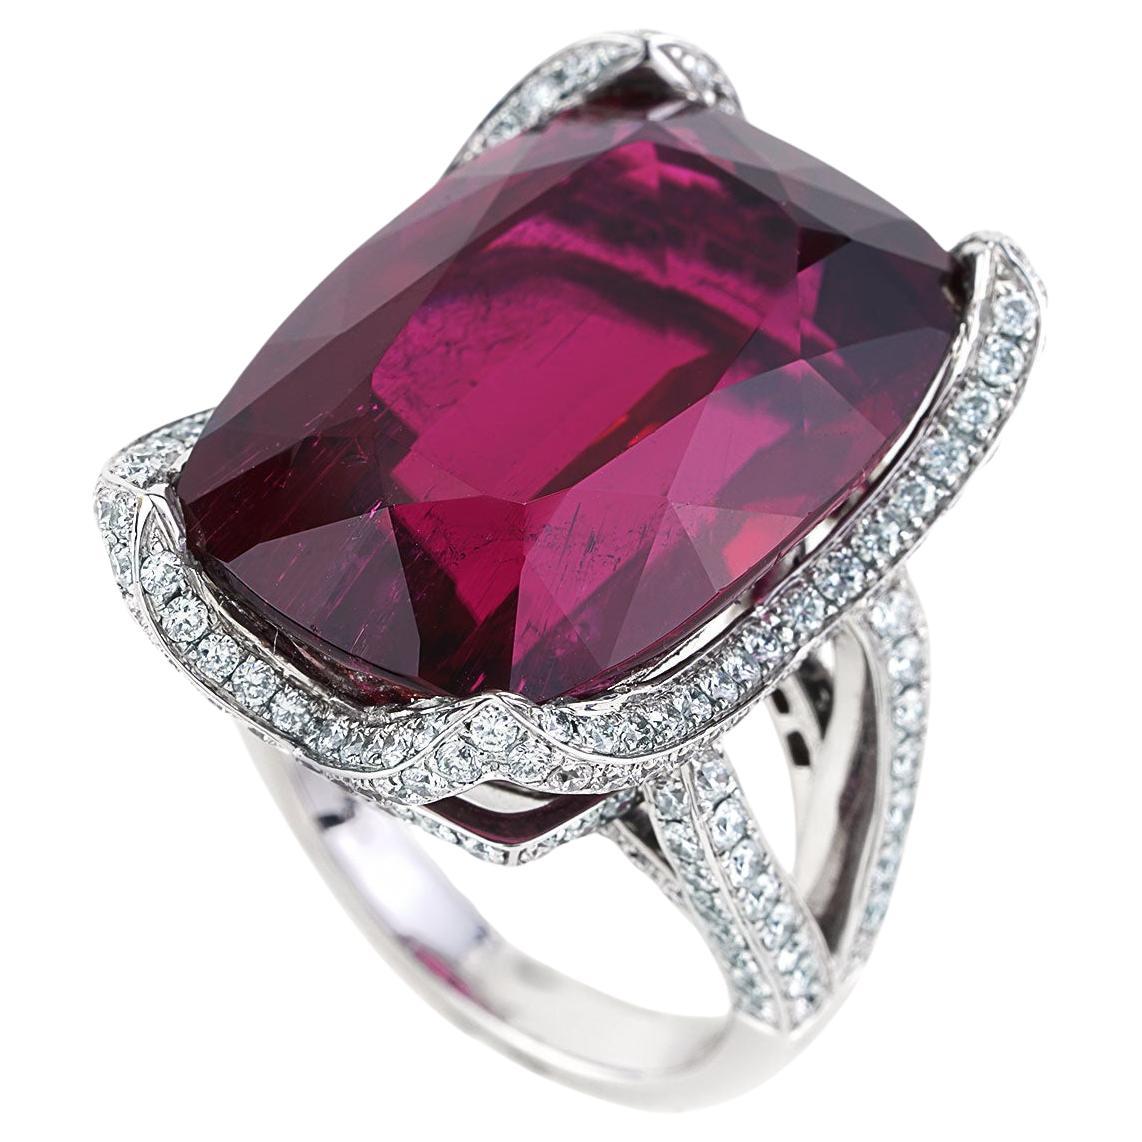 Very Rare 38.21 Carat Rubellite and Diamond Cocktail Ring in 18K White Gold For Sale